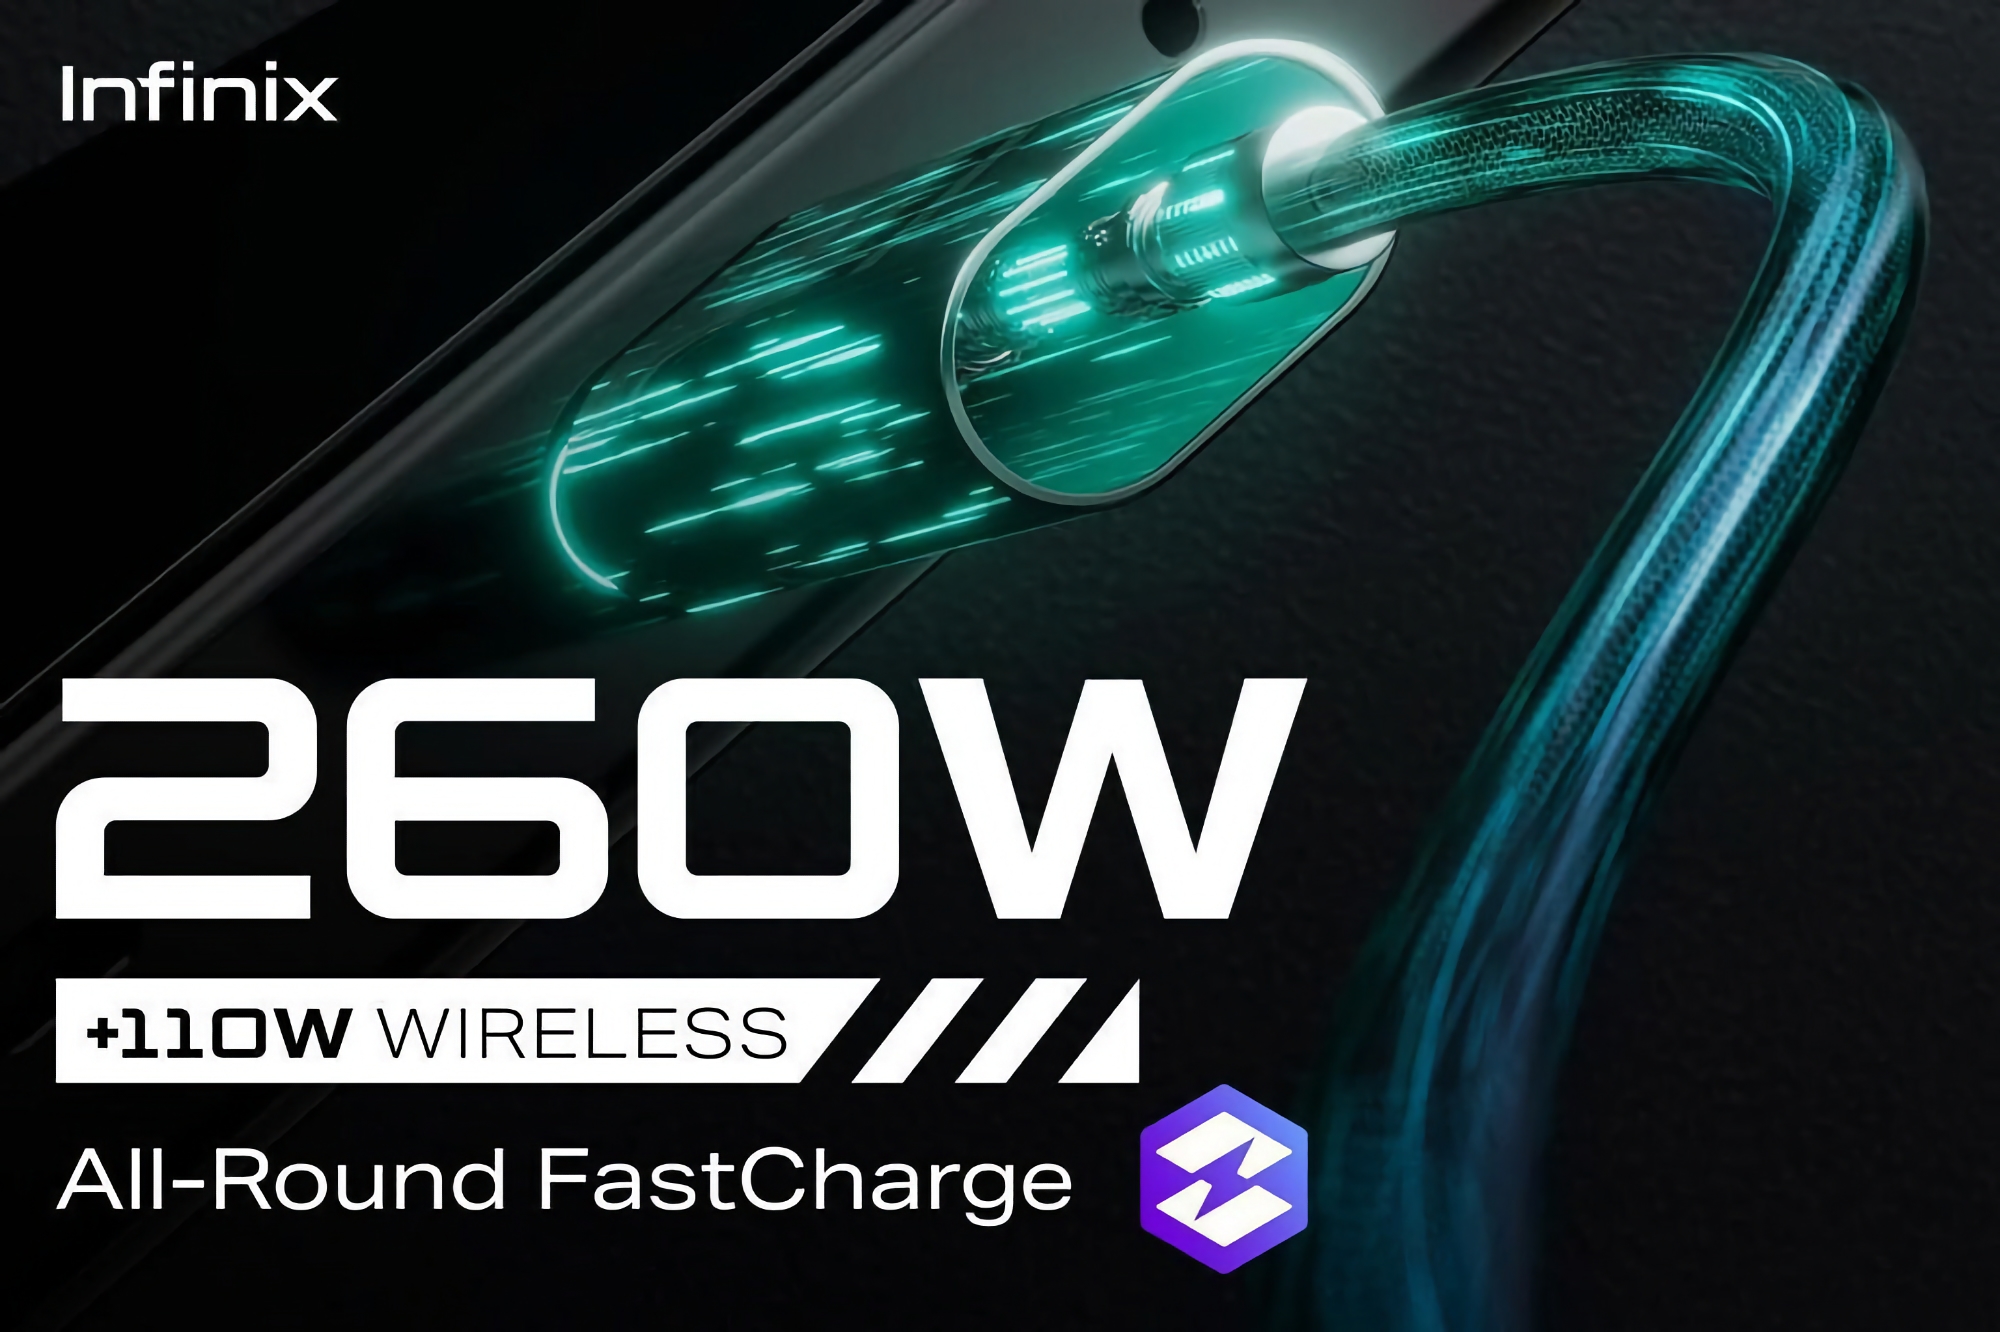 From 0 to 100% in 7.5 minutes: Infinix unveils 260W wired and 110W wireless  fast charging technology